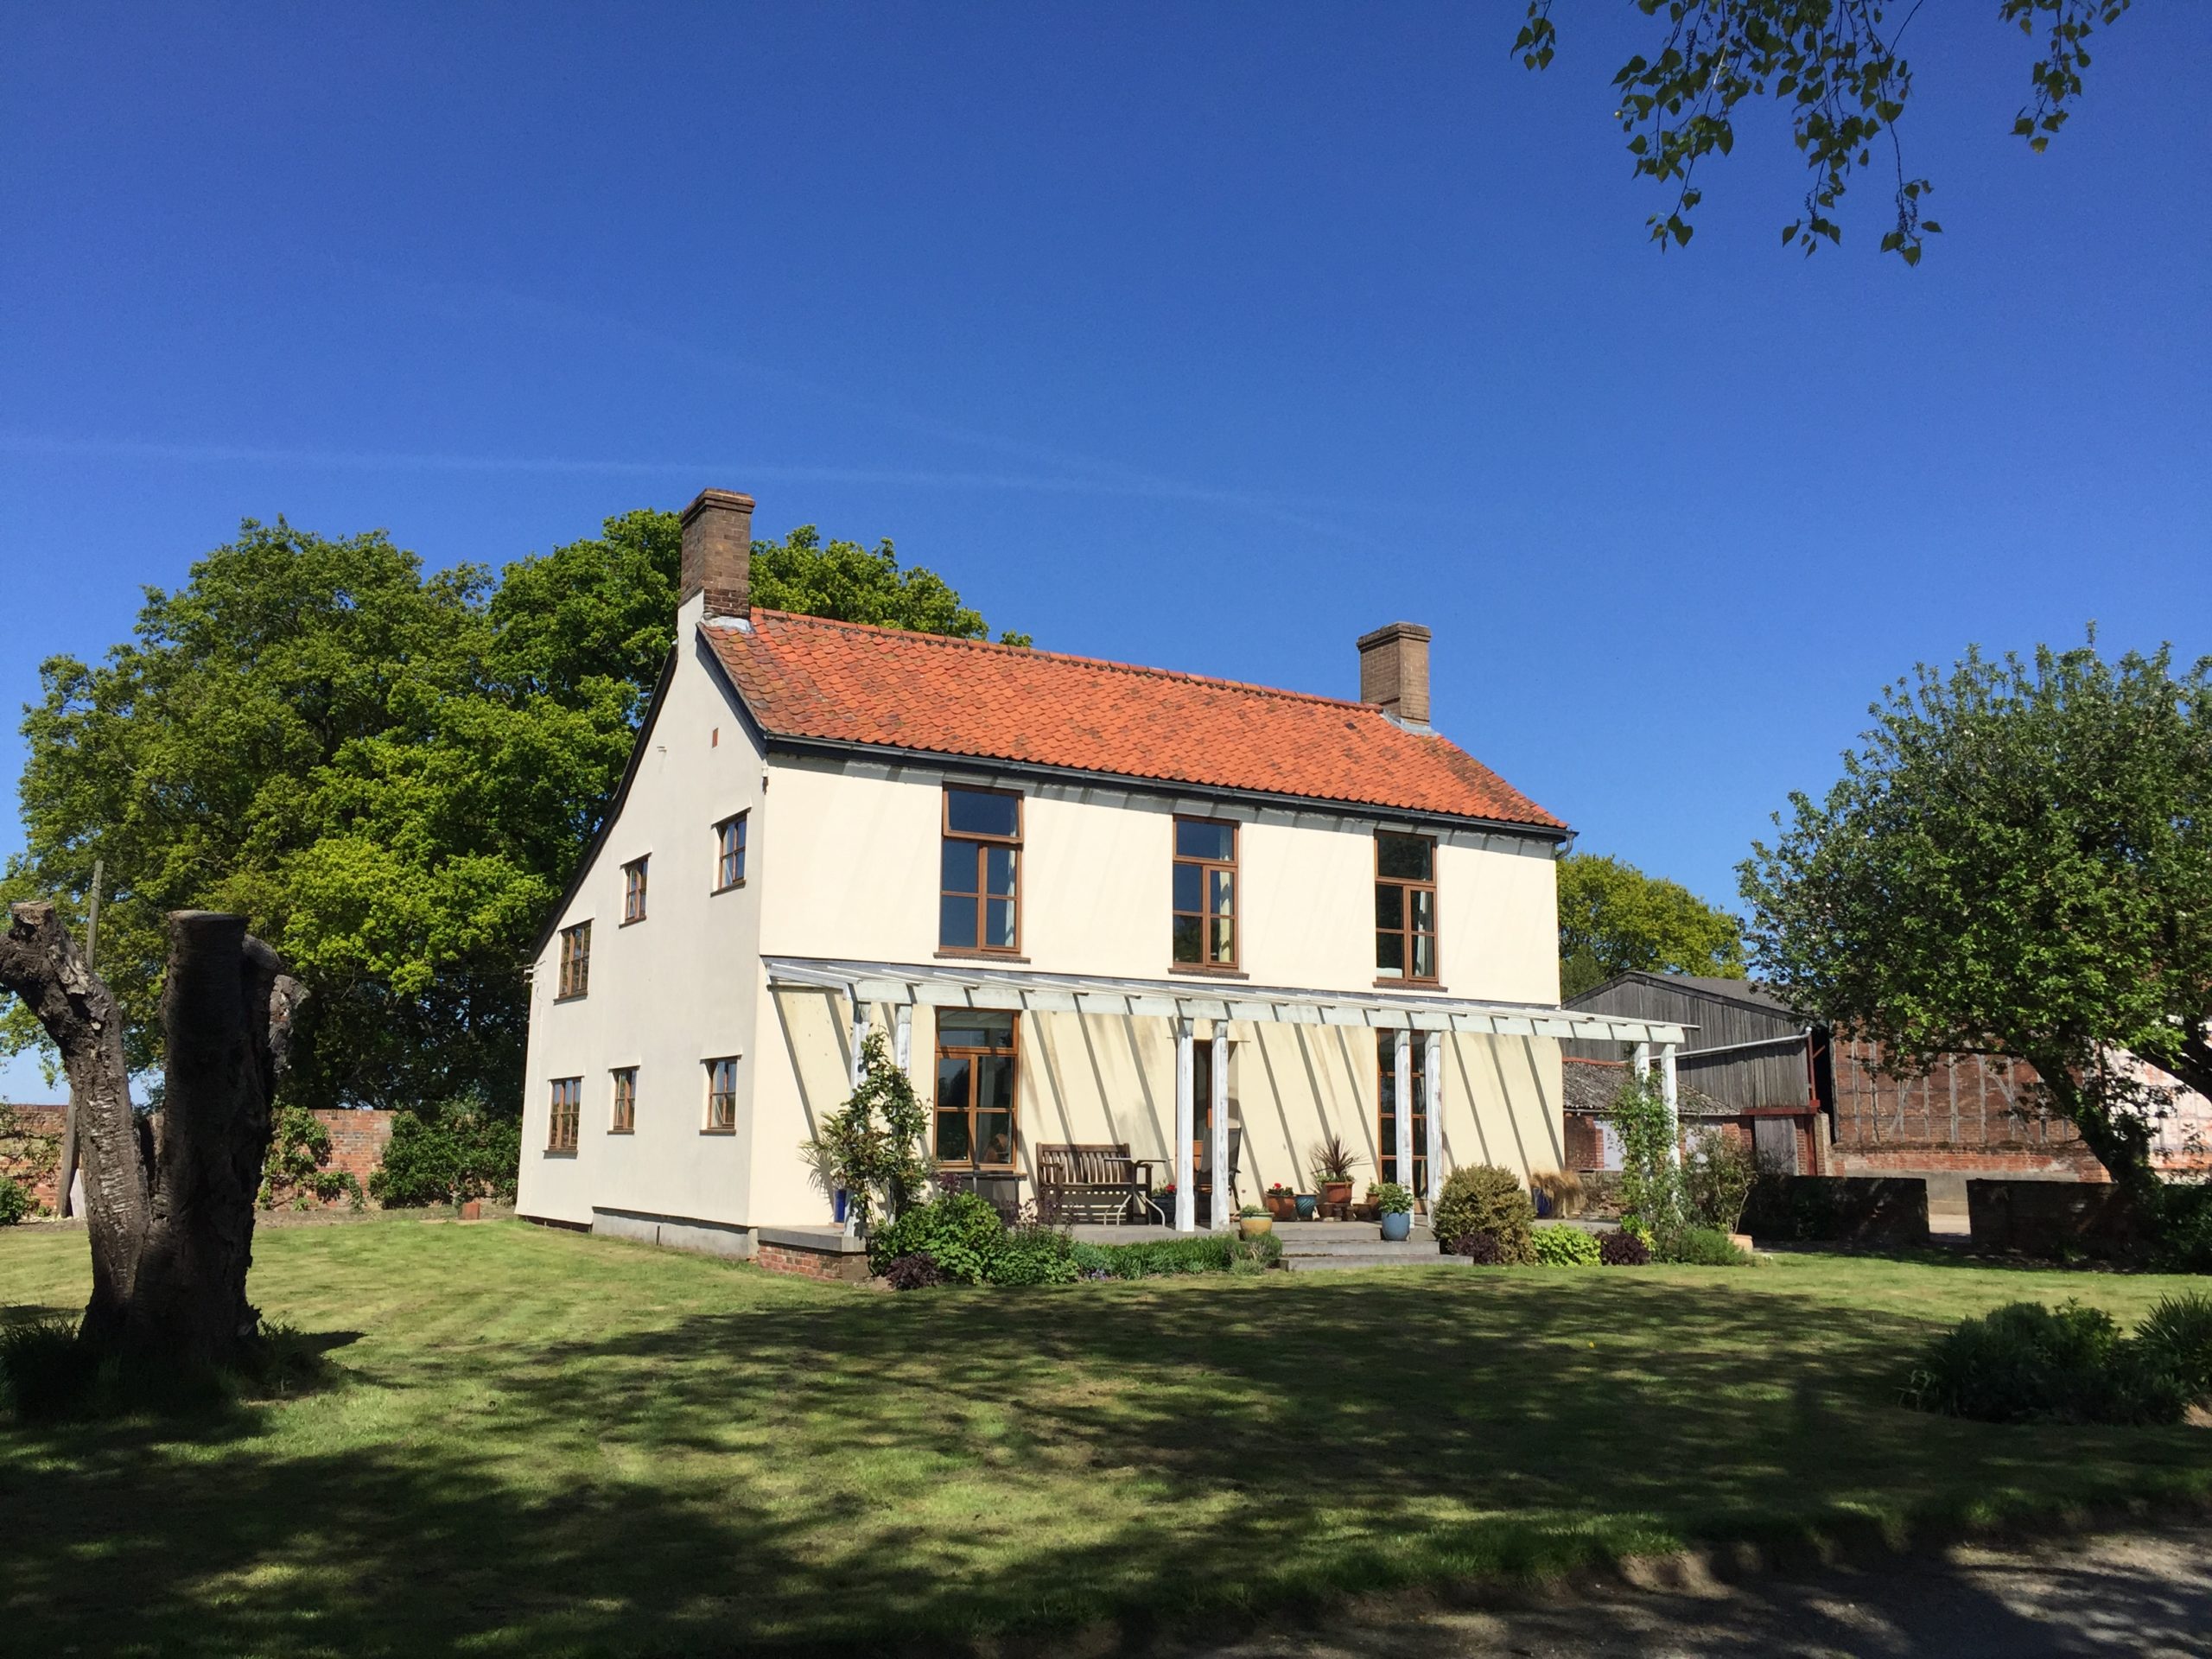 A 300 year old farm house is now heated by a ground source heat pump despite its low EPC rating